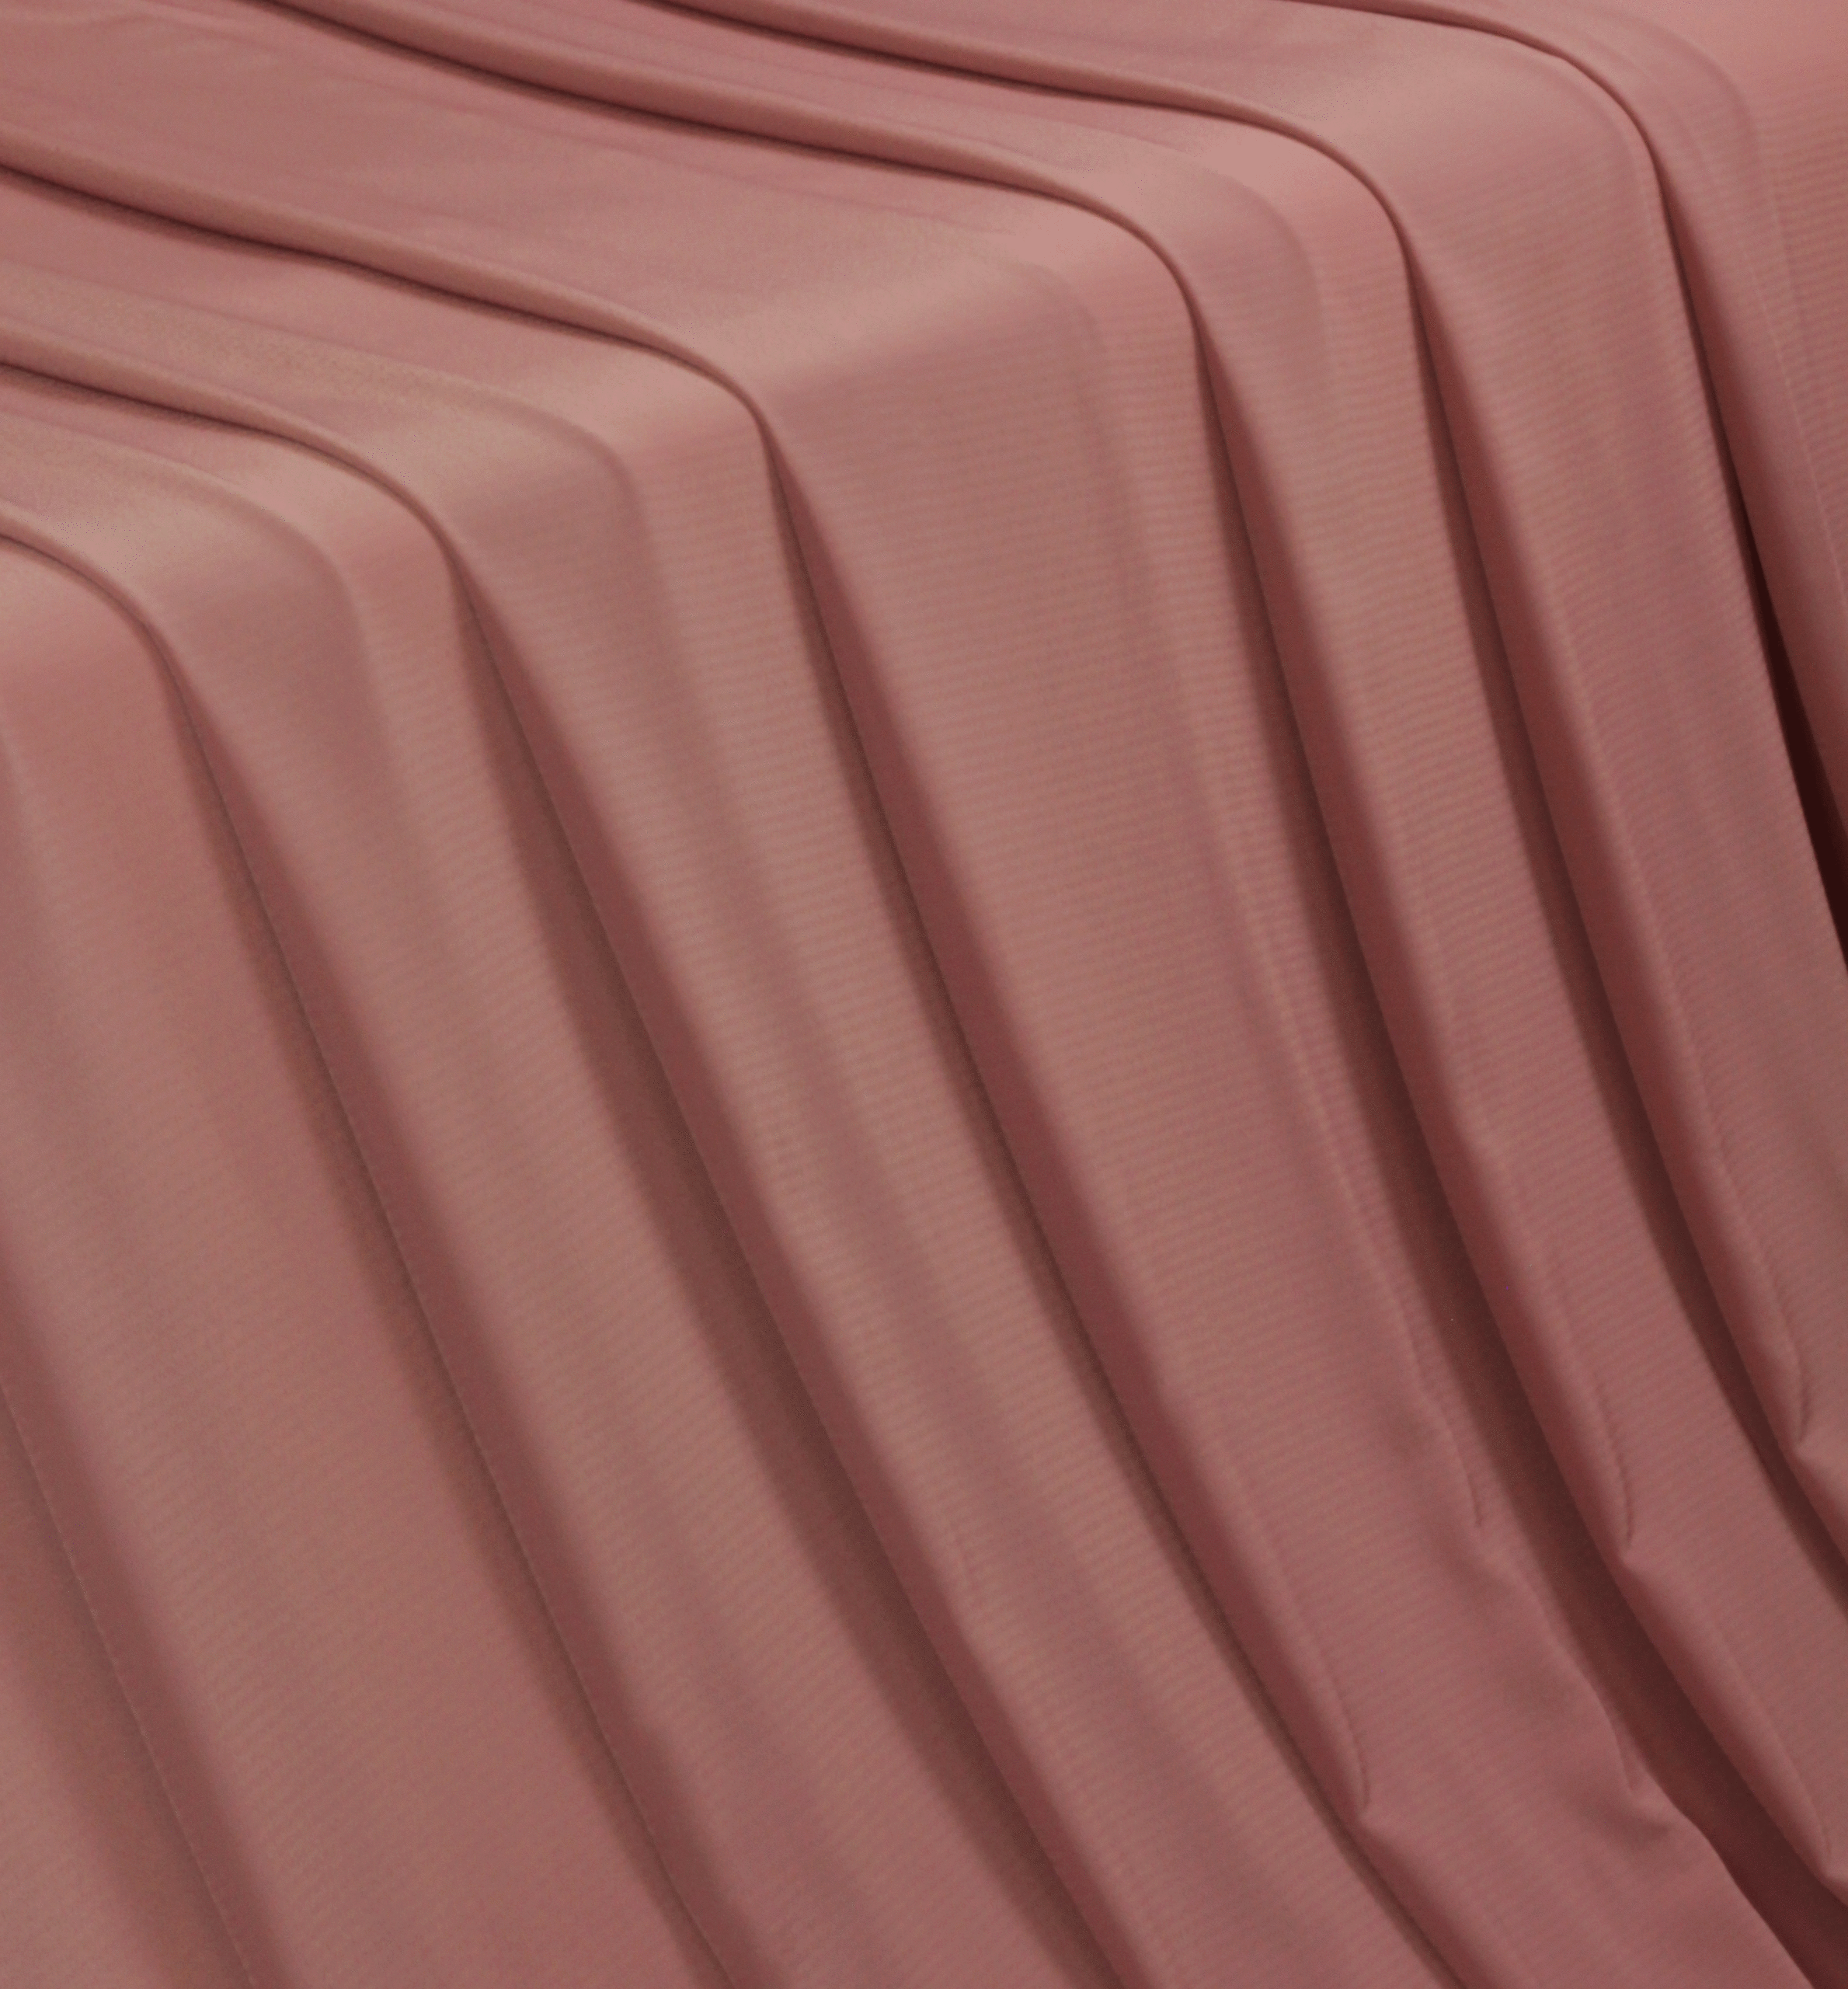 A solid mauve crepe wool dobbyfabric flowing over a table in a waterfall pattern.